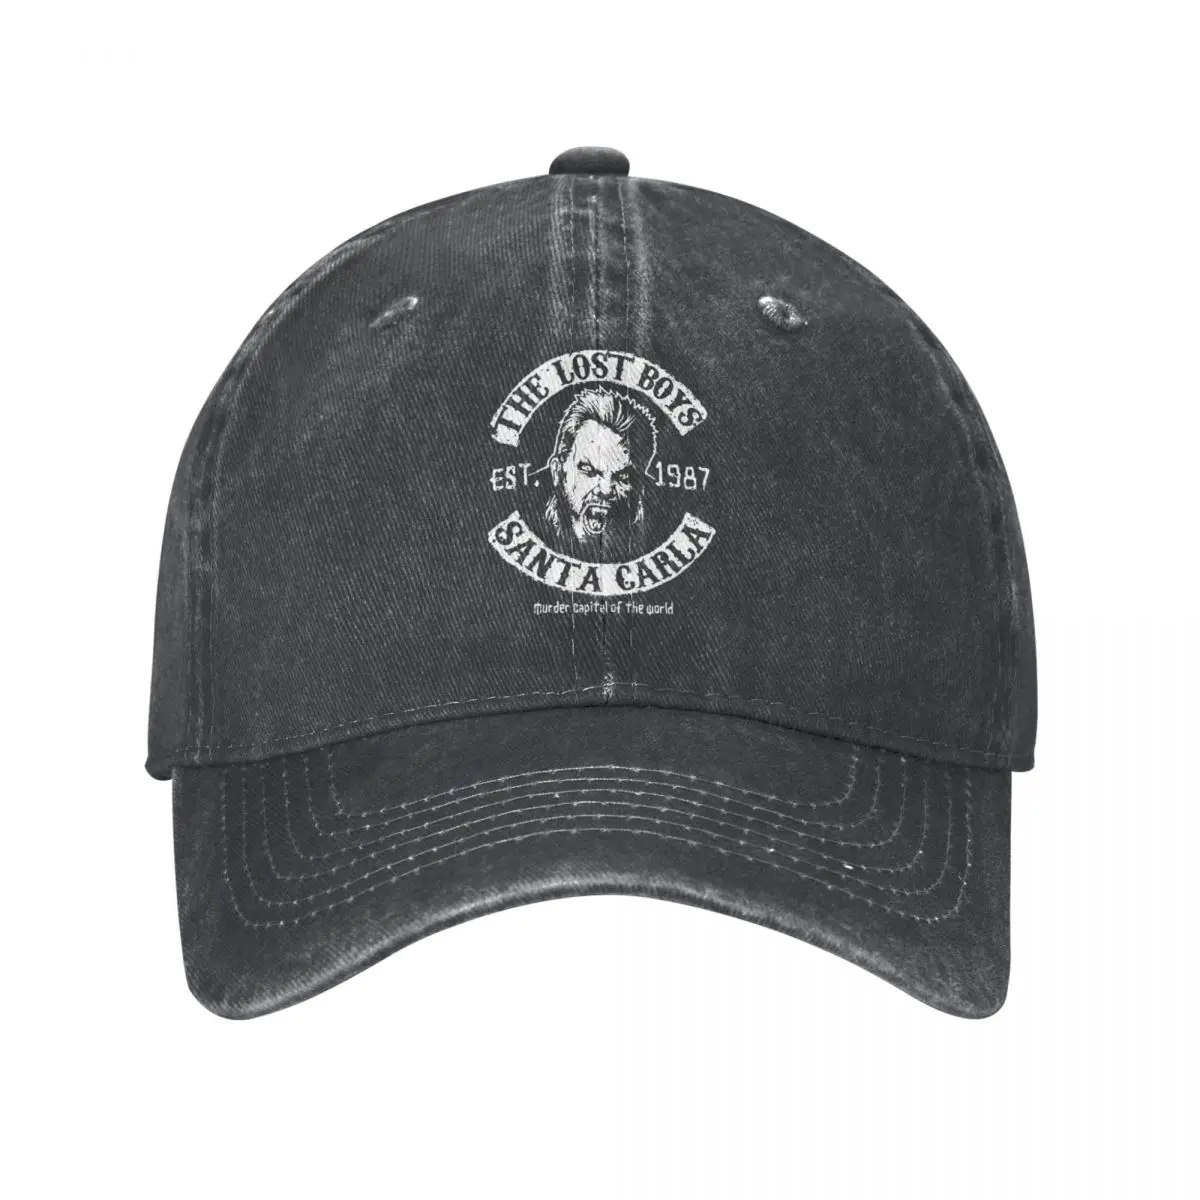 

Sons Of Anarchy Men Women Baseball Caps The Lost Boys Motorcycle Club Distressed Denim Washed Hats Cap Activities Adjustable